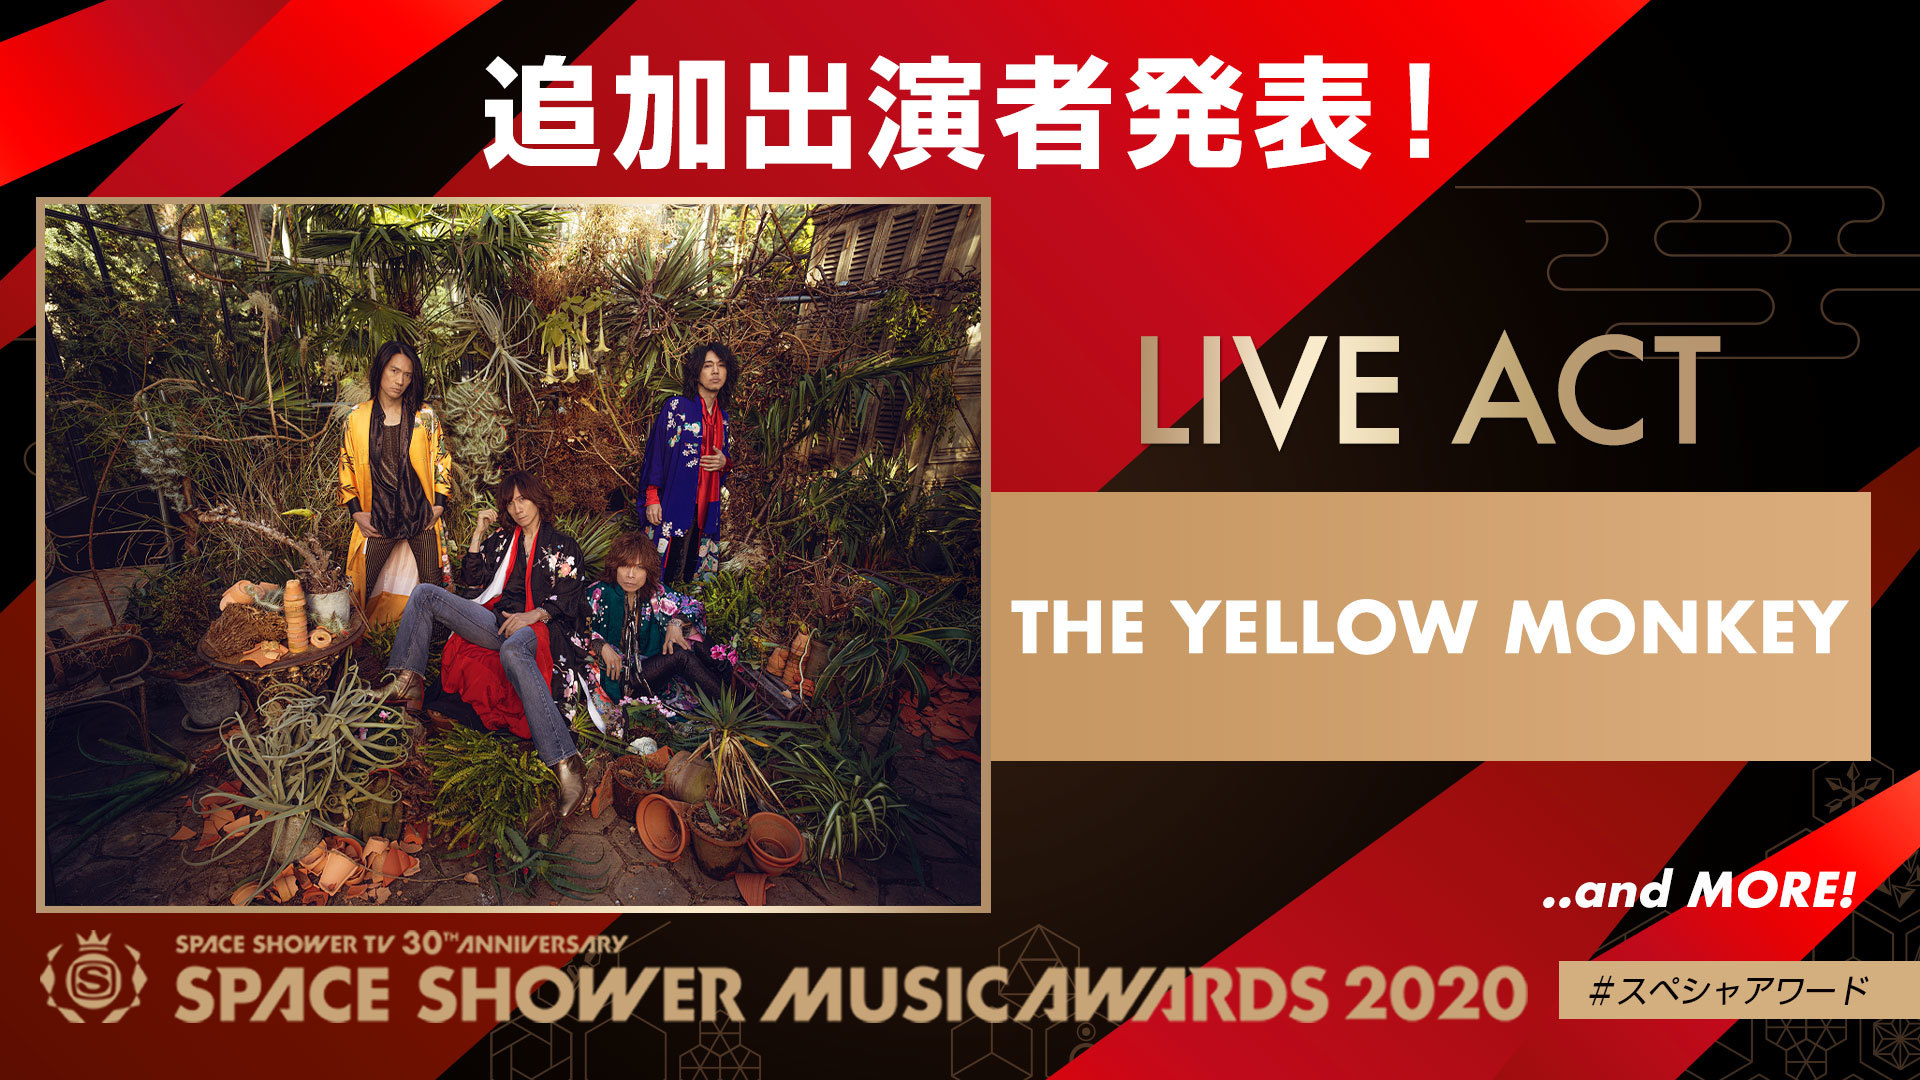 Space Shower Music Awards ライブアクトとしてthe Yellow Monkeyの出演を発表 Spice エンタメ特化型情報メディア スパイス